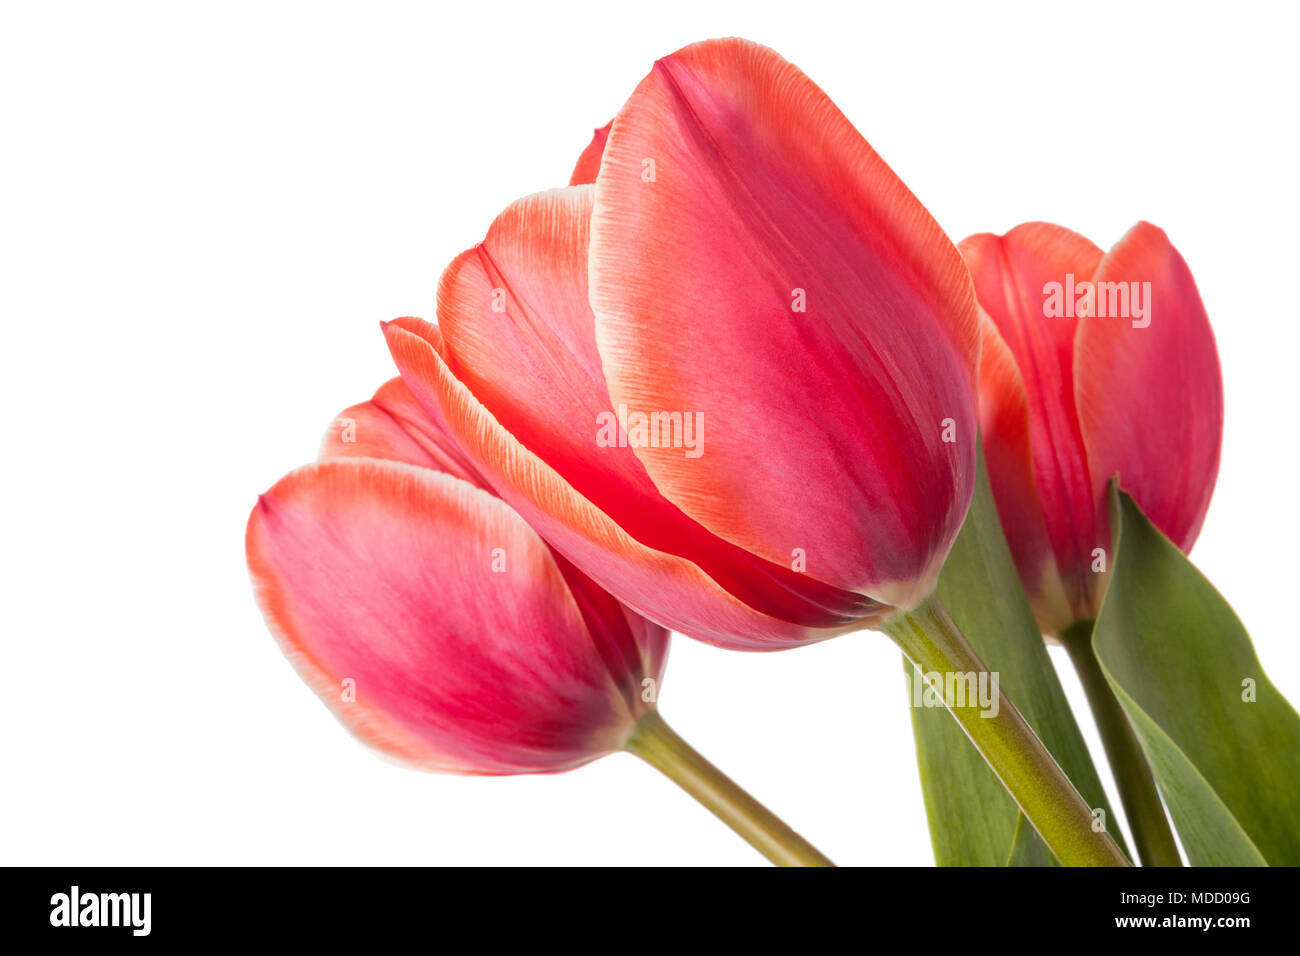 Red tulip flowers isolated on a white background Stock Photo